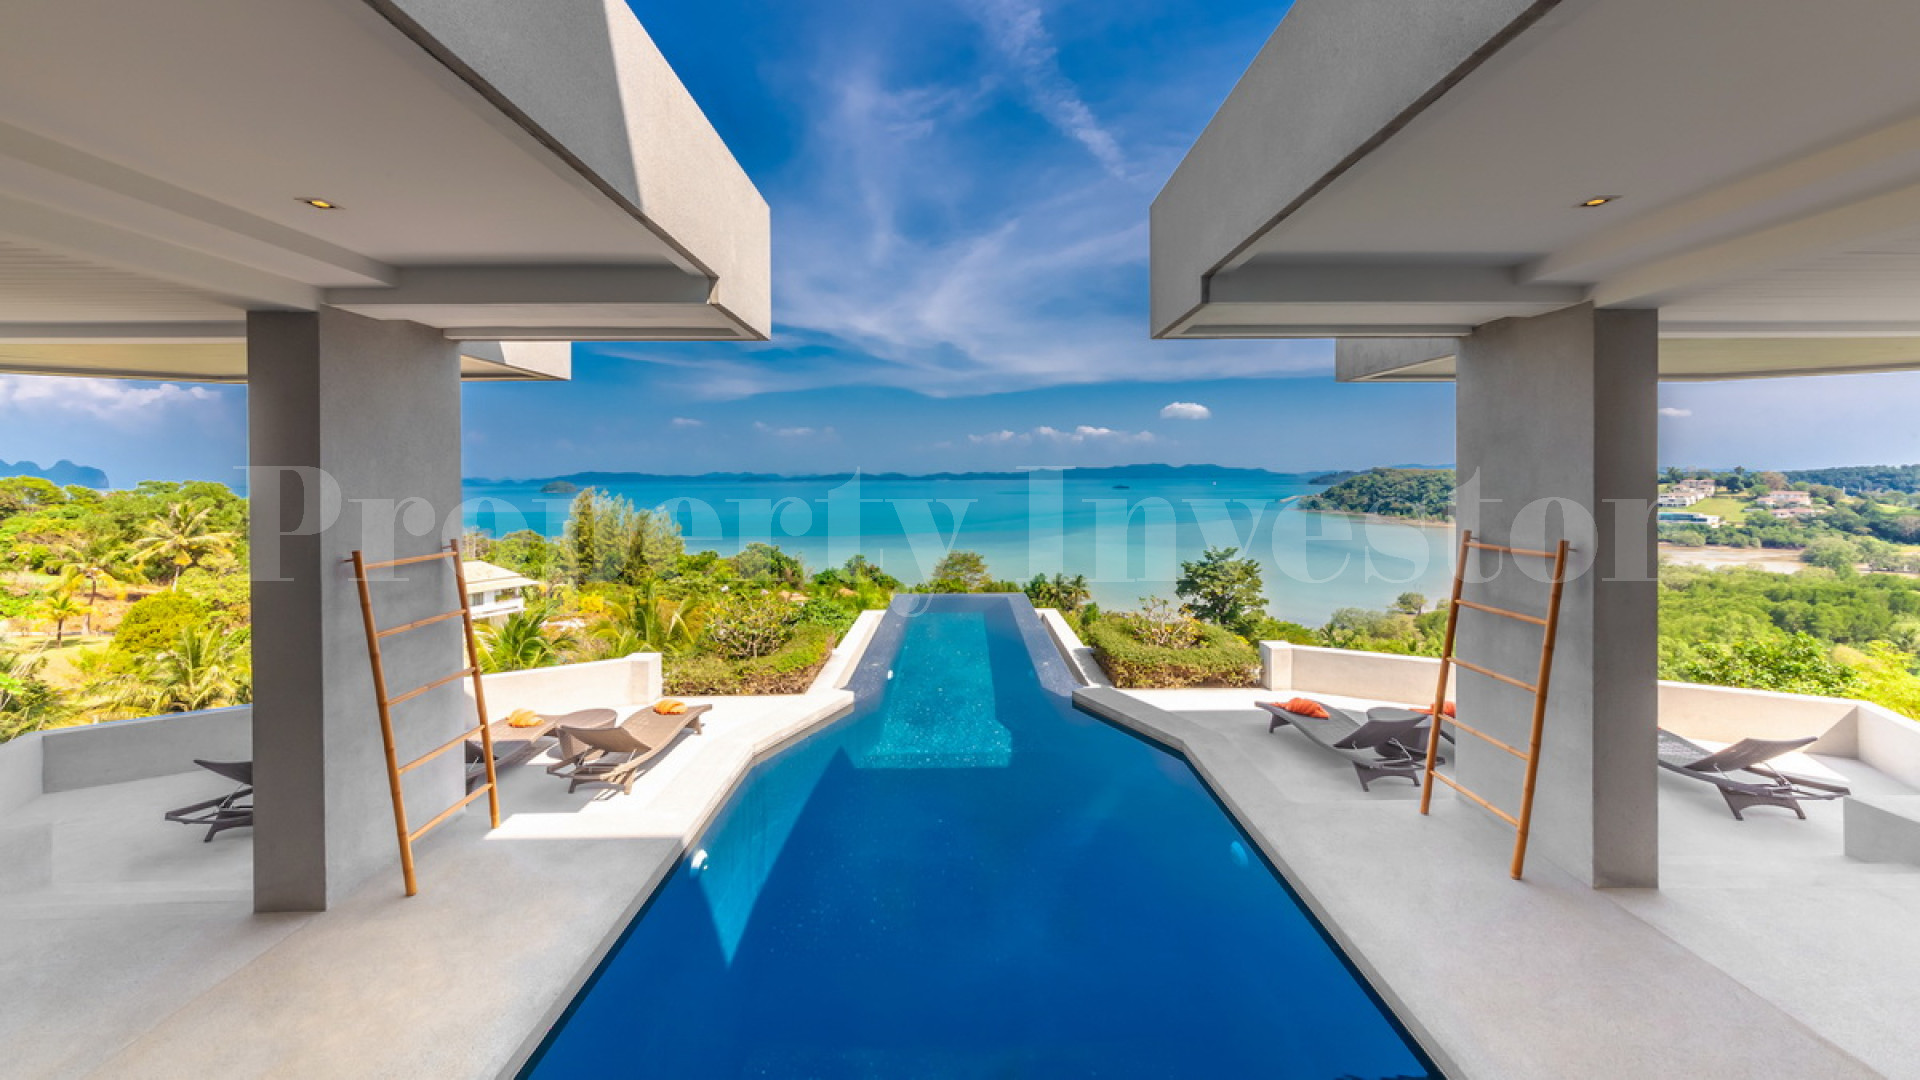 One-of-a-Kind 5 Bedroom Luxury Modern Minimalist Designer Villa with Amazing Extended Infinity Pool for Sale in Phuket